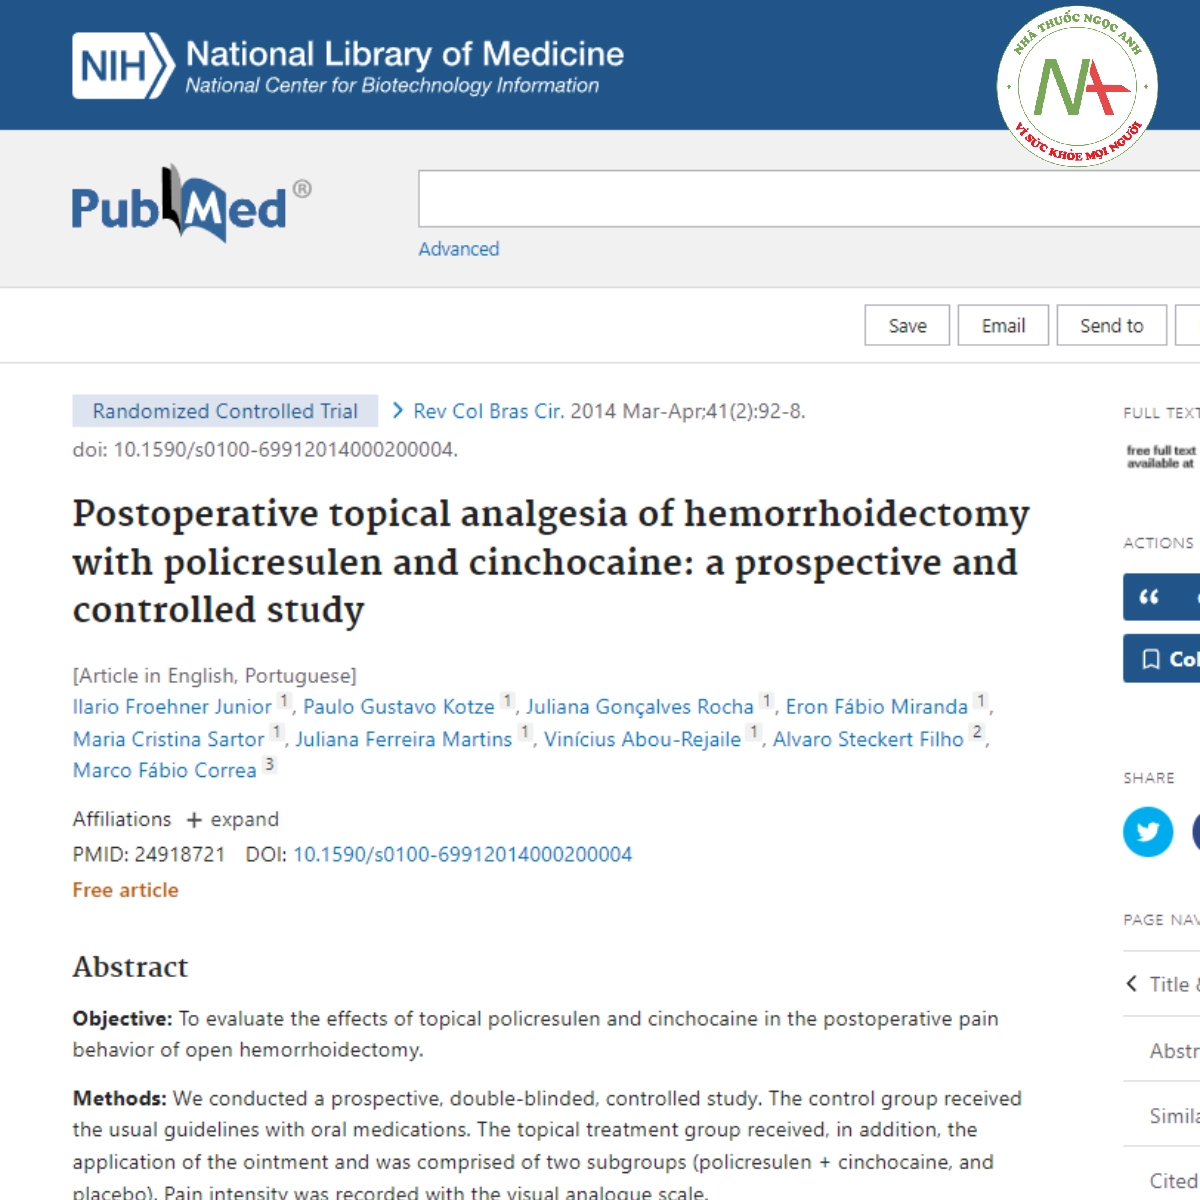 Postoperative topical analgesia of hemorrhoidectomy with policresulen and cinchocaine_ a prospective and controlled study